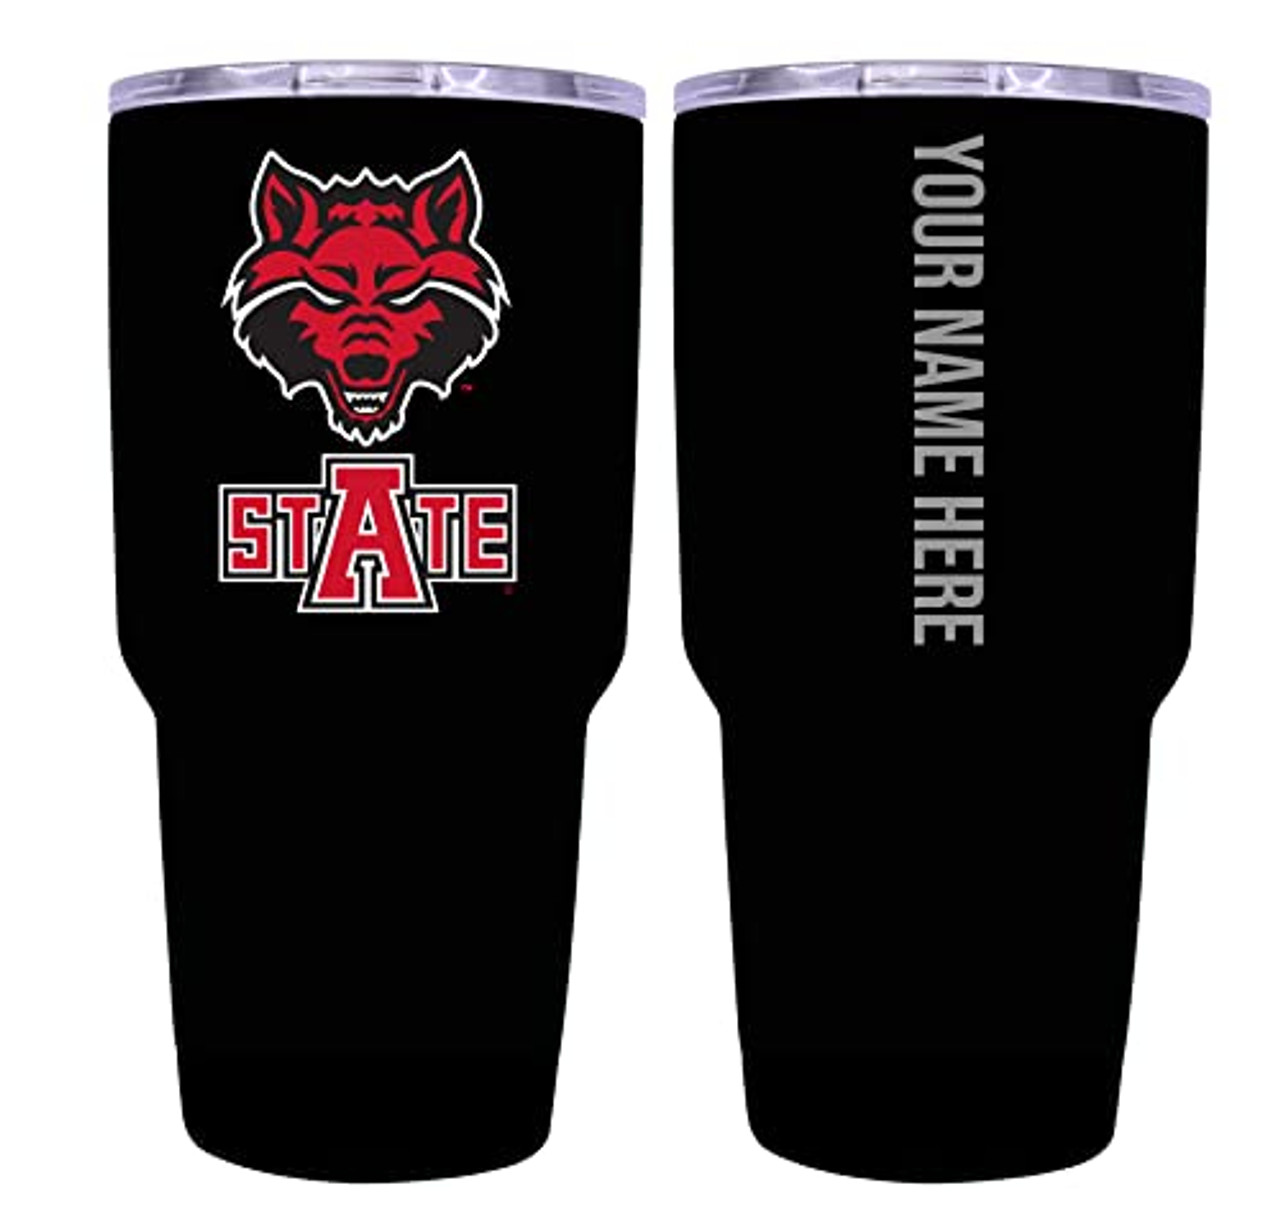 Collegiate Custom Personalized Arkansas State, 24 oz Insulated Stainless Steel Tumbler with Engraved Name (Black)